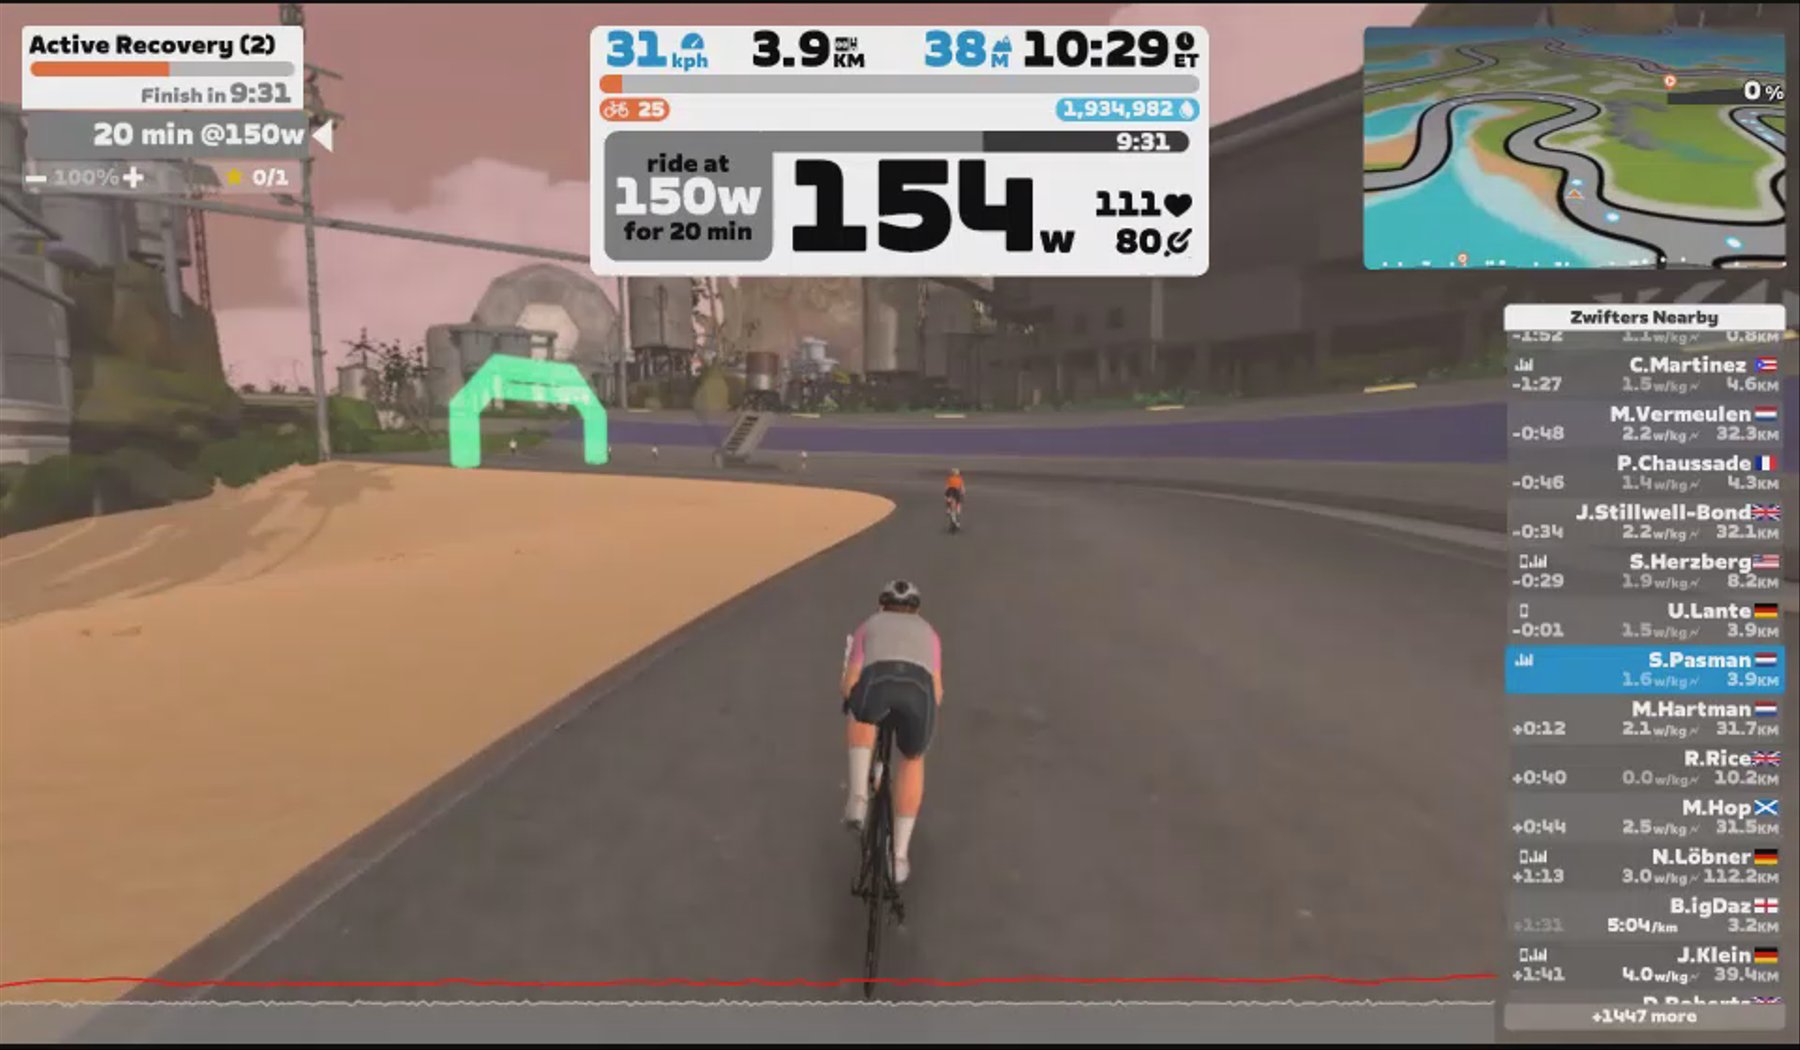 Zwift - Active Recovery (2) in Makuri Islands